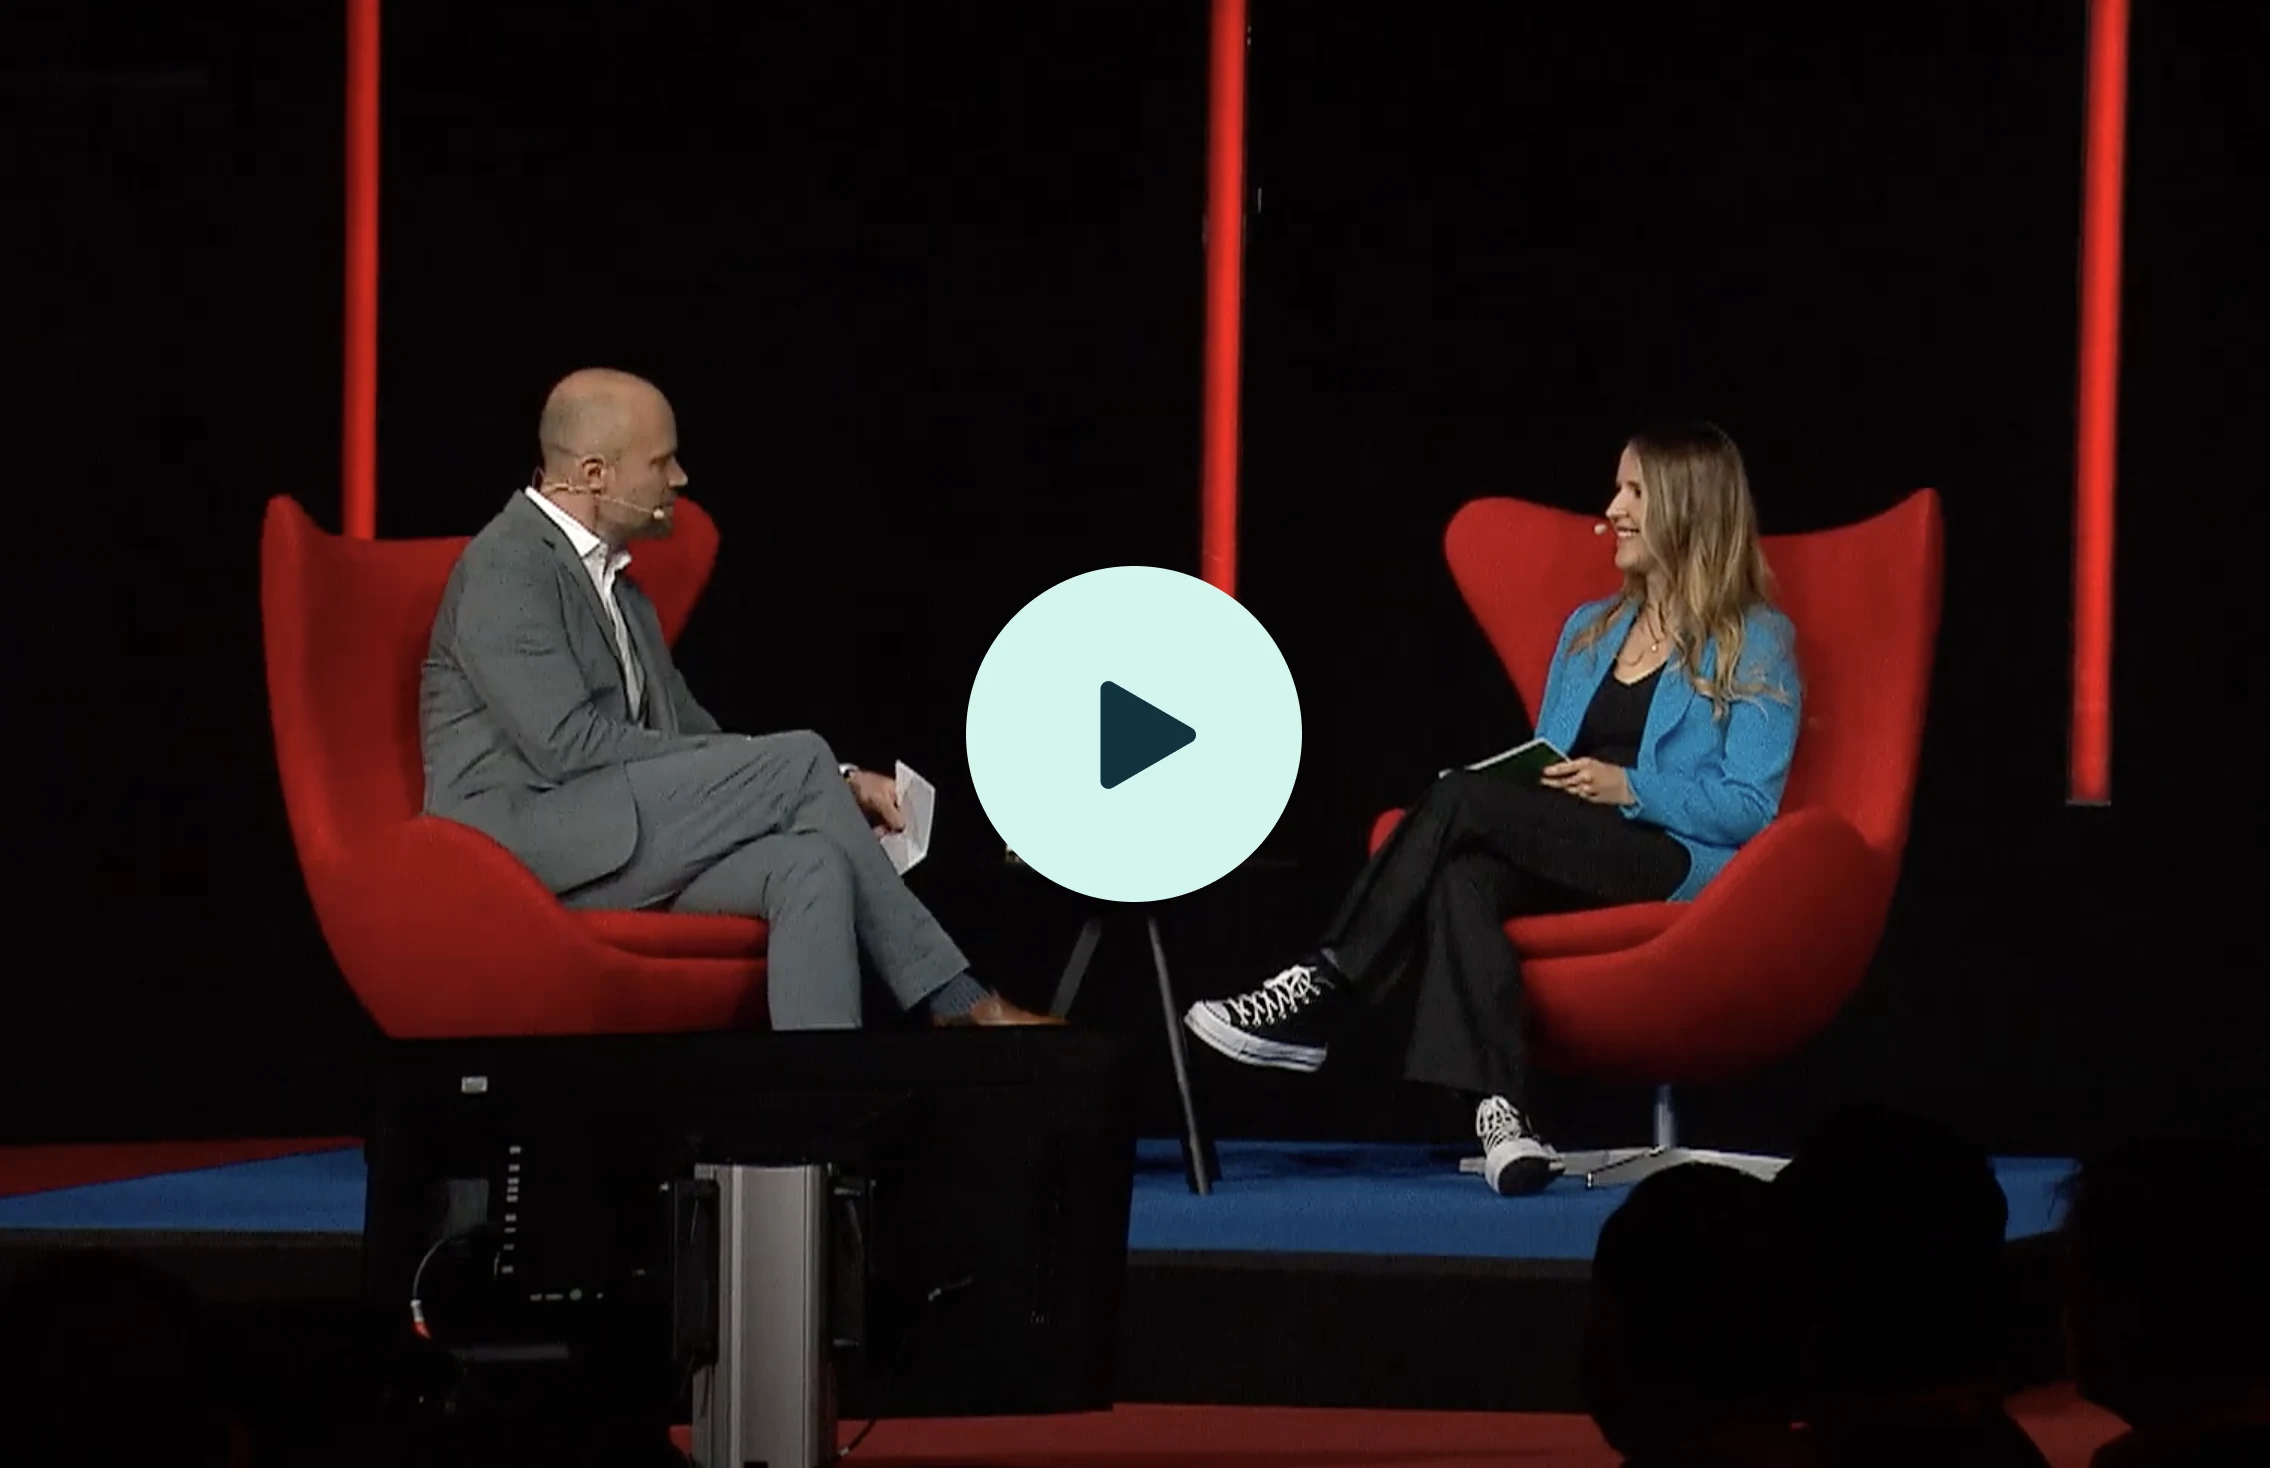 Pinterest's DACH Country Manager Martin Bardeleben onstage at DMEXCO 2022 with Nadine Kamski of L'Oreal